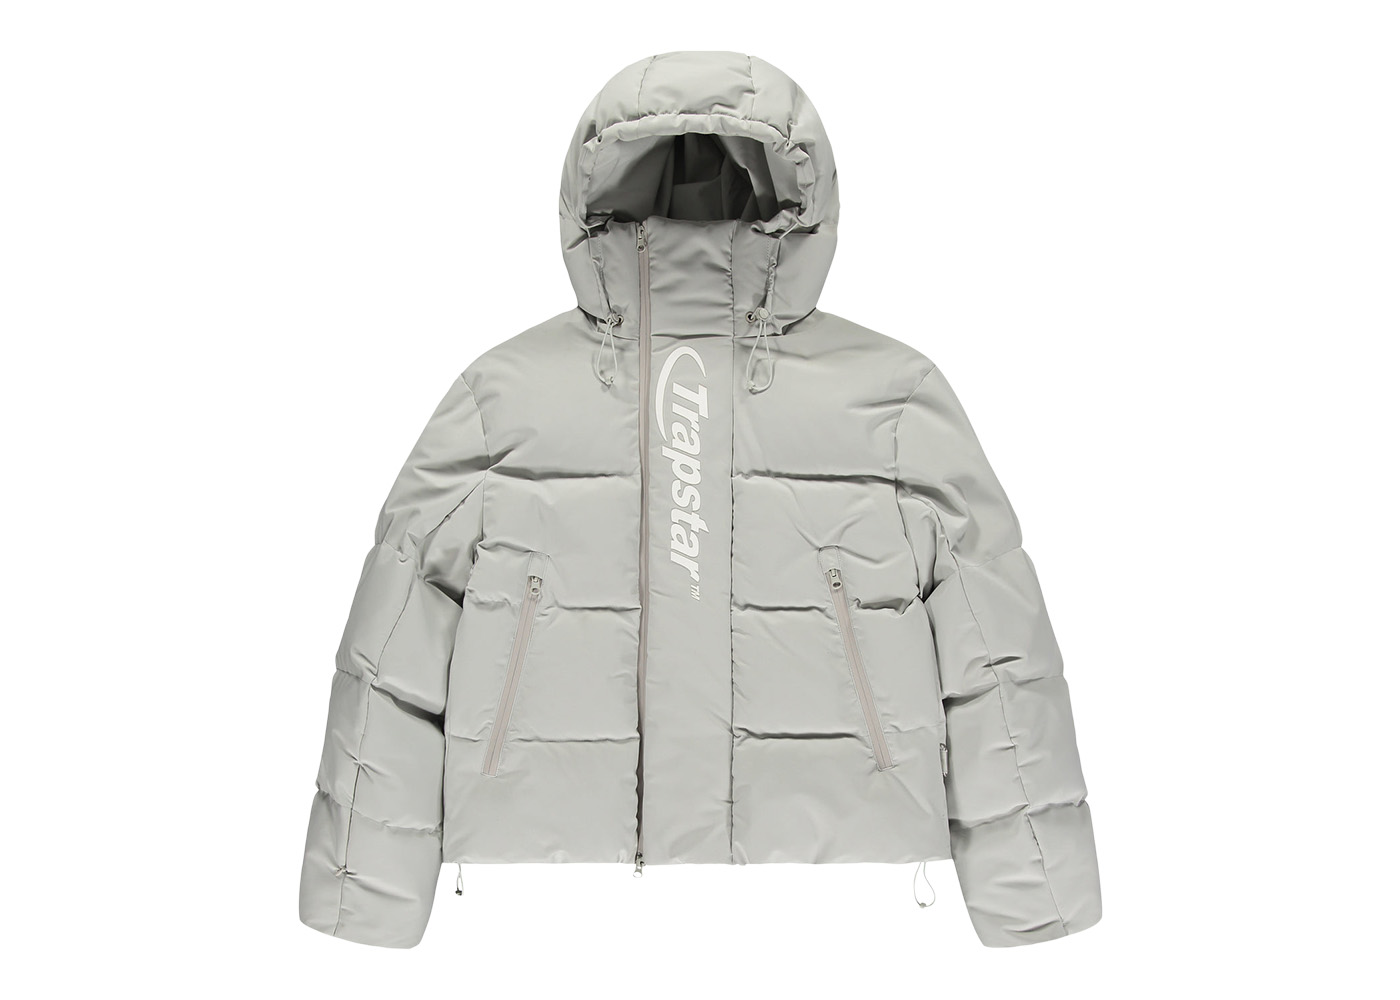 Designer Hooded Down Jacket For Men Trapstar Winter Coat With Windproof,  Removable Cap & Warmth Ideal For Outdoor Activities From Rostir01, $131.99  | DHgate.Com